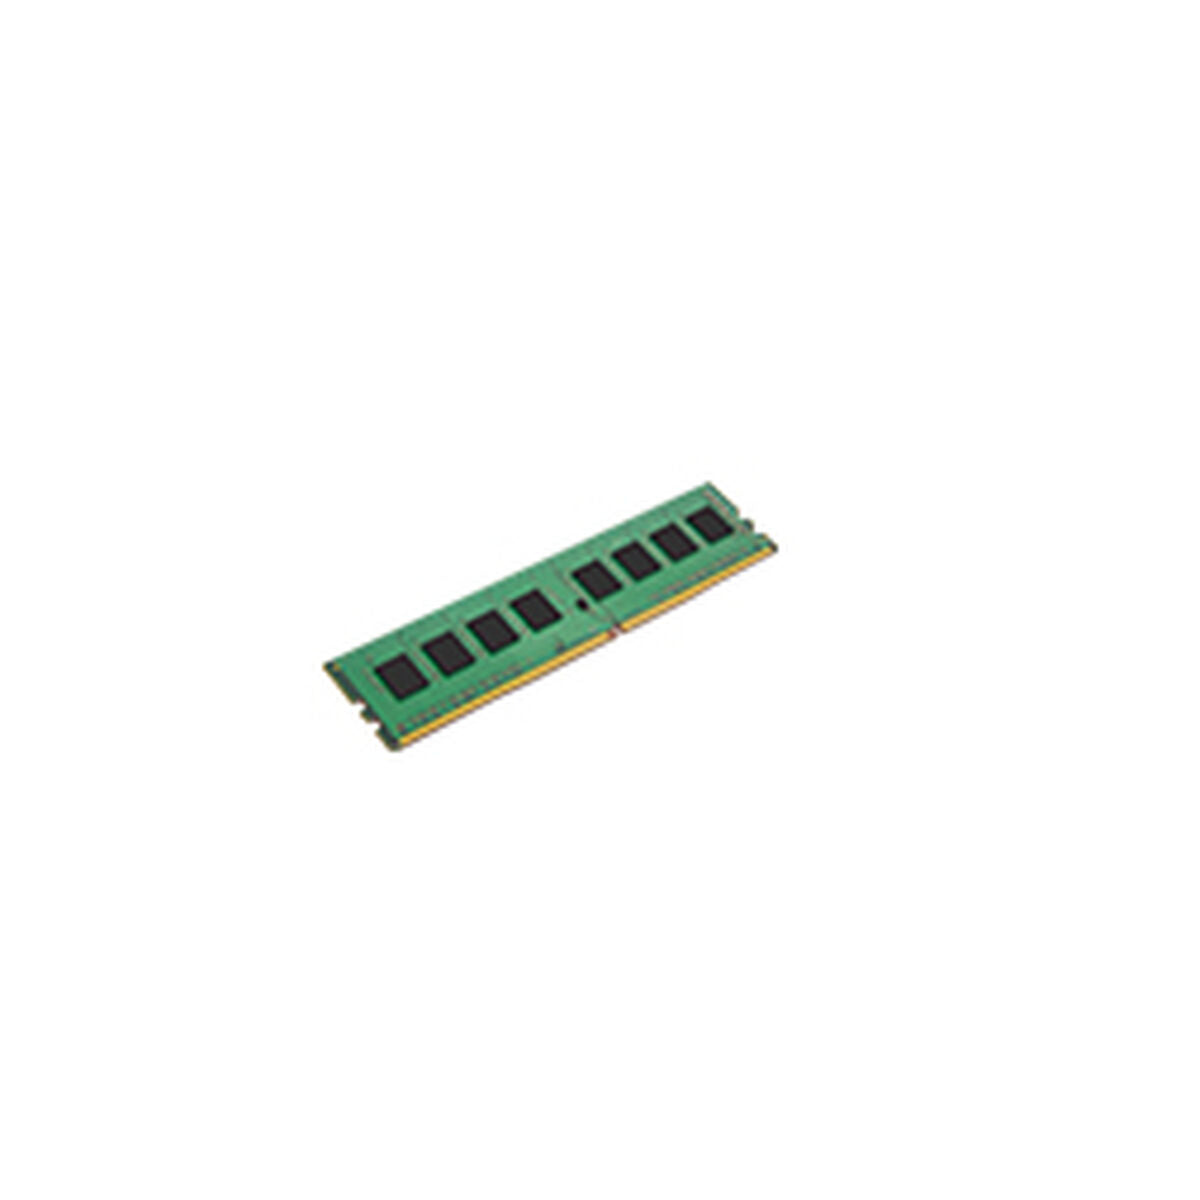 RAM Memory Kingston KCP426ND8/32, Kingston, Computing, Printers and accessories, ram-memory-kingston-kcp426nd8-32, Brand_Kingston, category-reference-2609, category-reference-2803, category-reference-2813, category-reference-t-19685, category-reference-t-19911, category-reference-t-21377, computers / components, Condition_NEW, Price_50 - 100, RiotNook